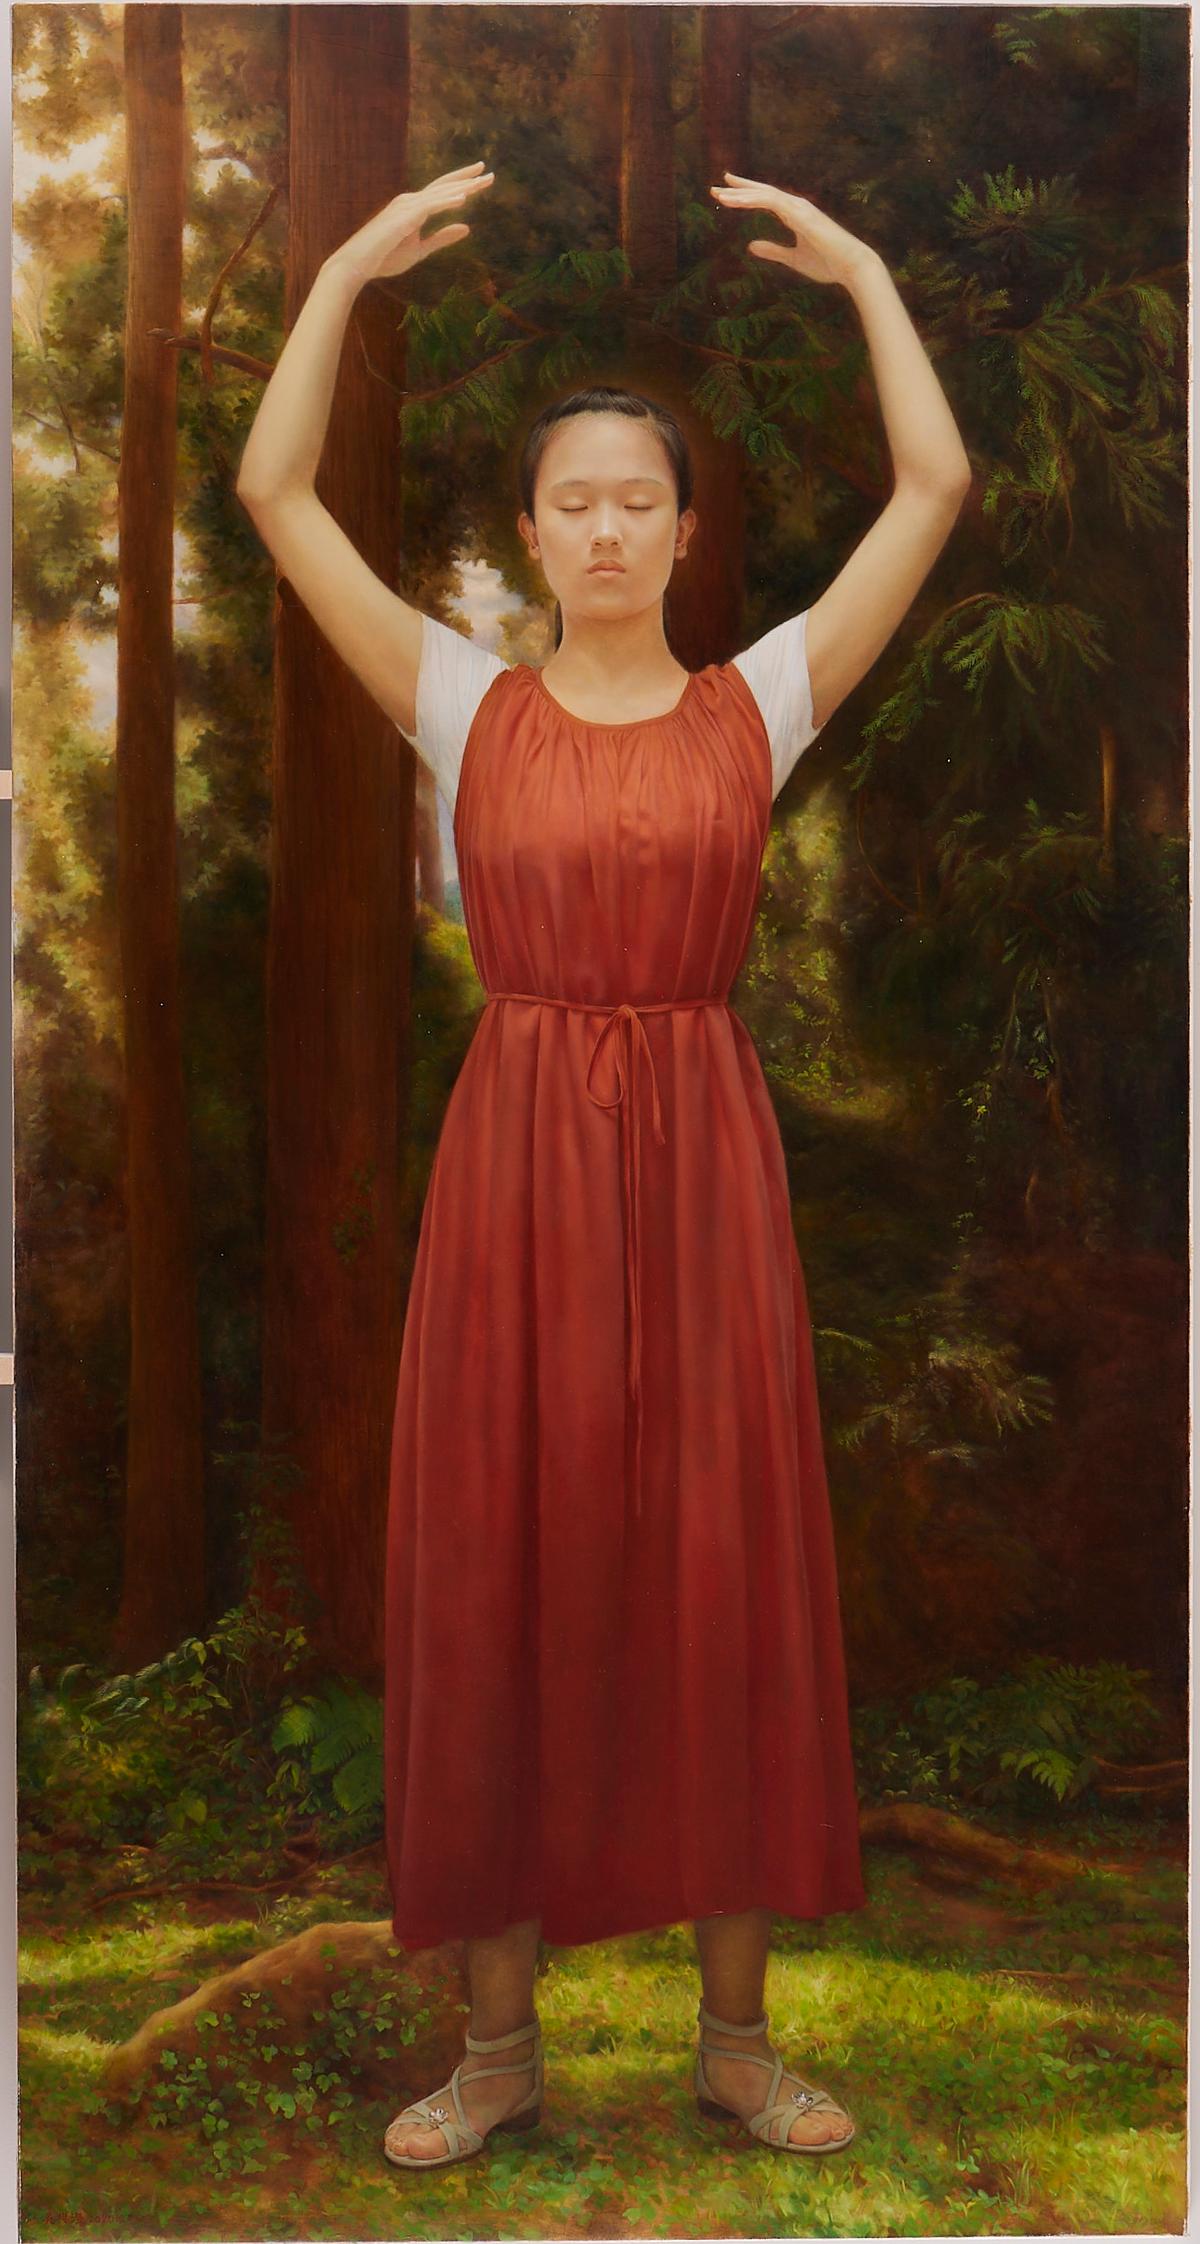 The bronze award-winning work “The Revival” by Tien-Cheng Wu of Taiwan. Oil on Canvas; 82 2/8 inches by 43 1/8 inches. (NTD International Figure Painting Competition)